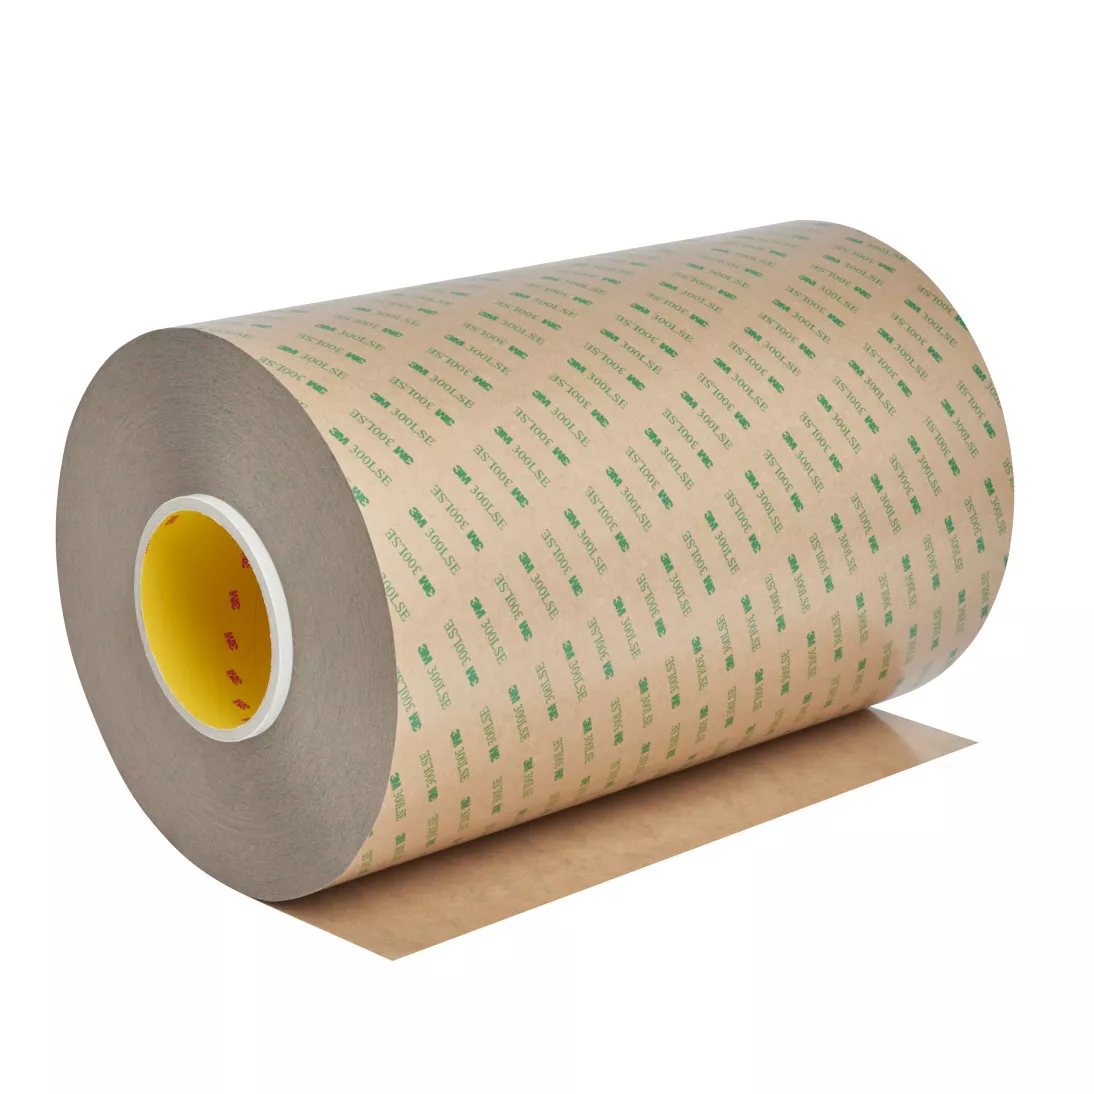 3M™ Adhesive Transfer Tape 9471LE, Clear, 54 in x 360 yd, 2.3 mil, 1
roll per case